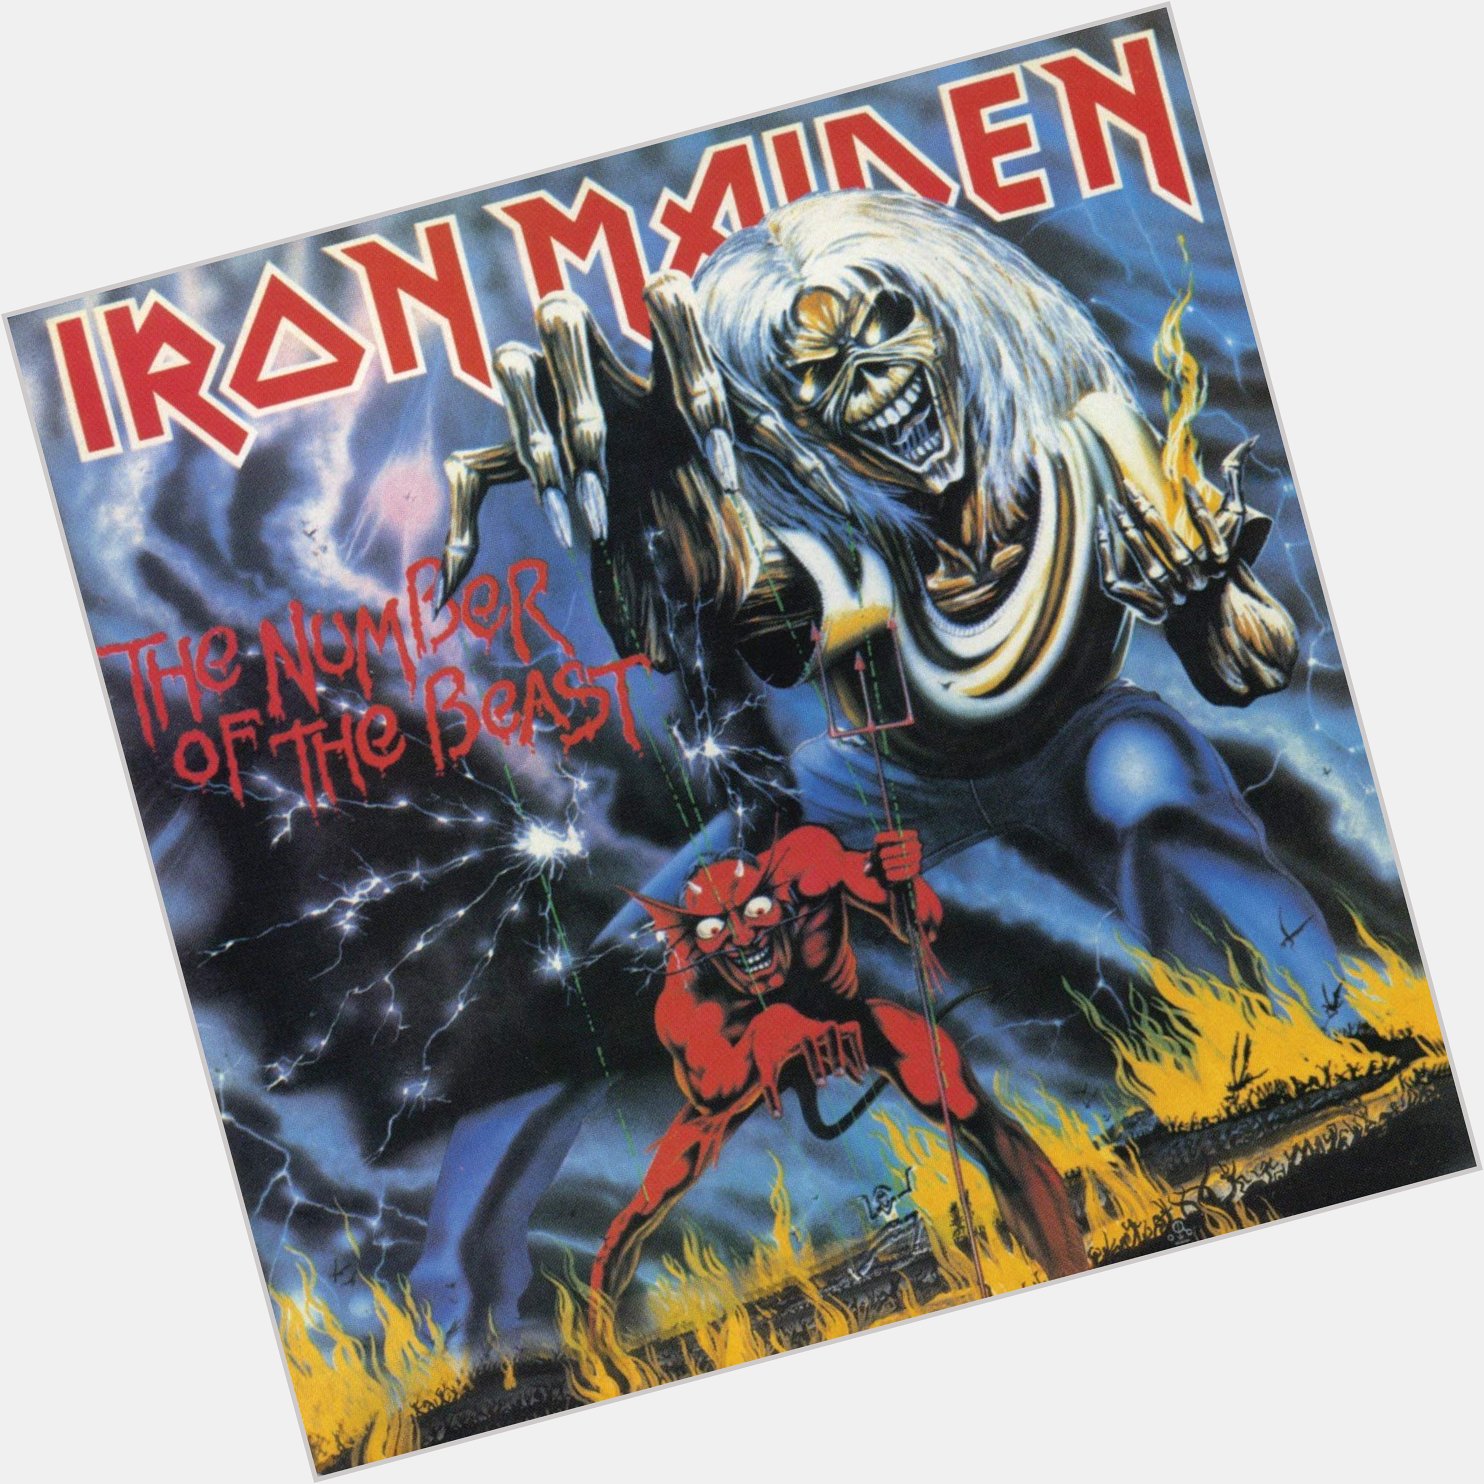  Invaders
from The Number Of The Beast
by Iron Maiden

Happy Birthday, Bruce Dickinson 